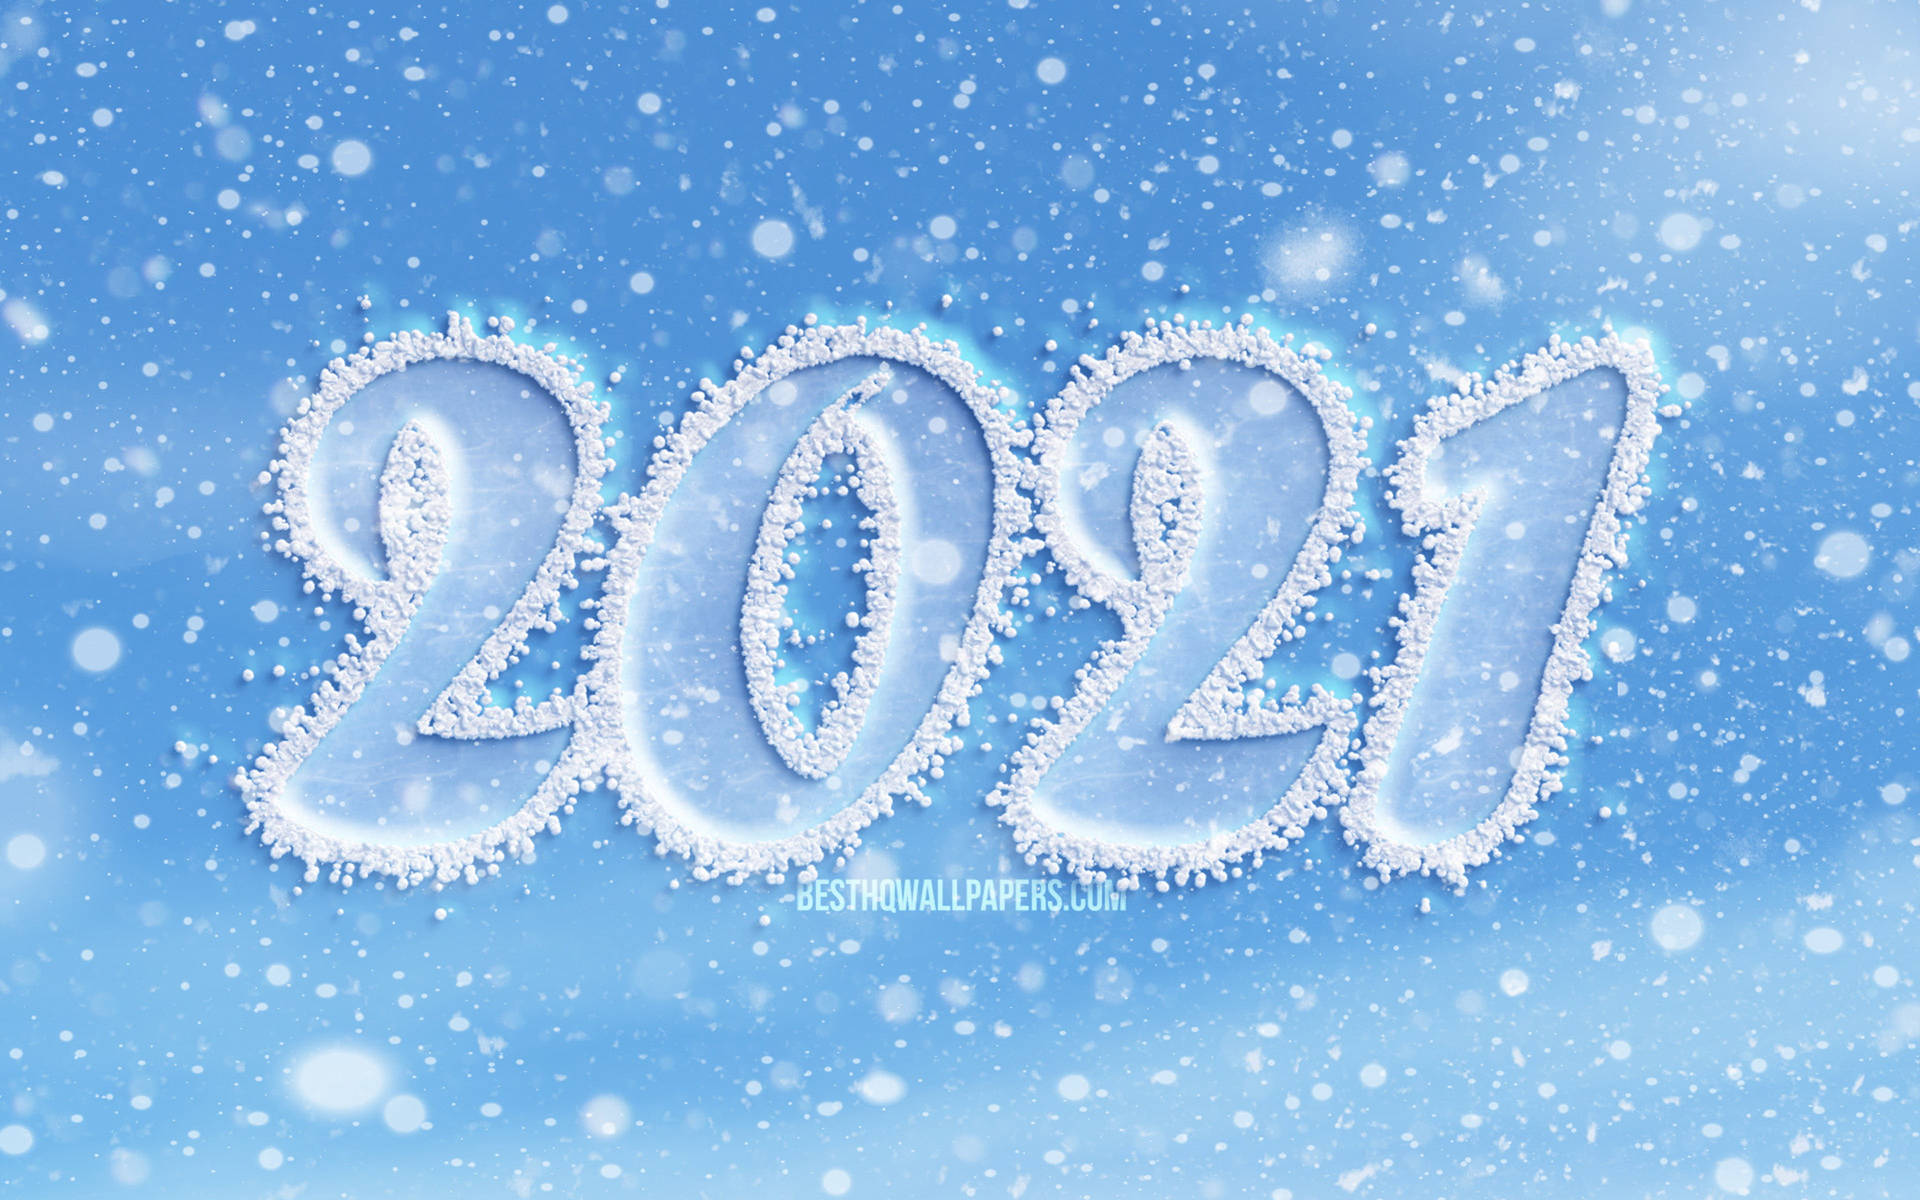 Embrace the New Year - Snowy 2021 Welcome Scene. Wallpaper